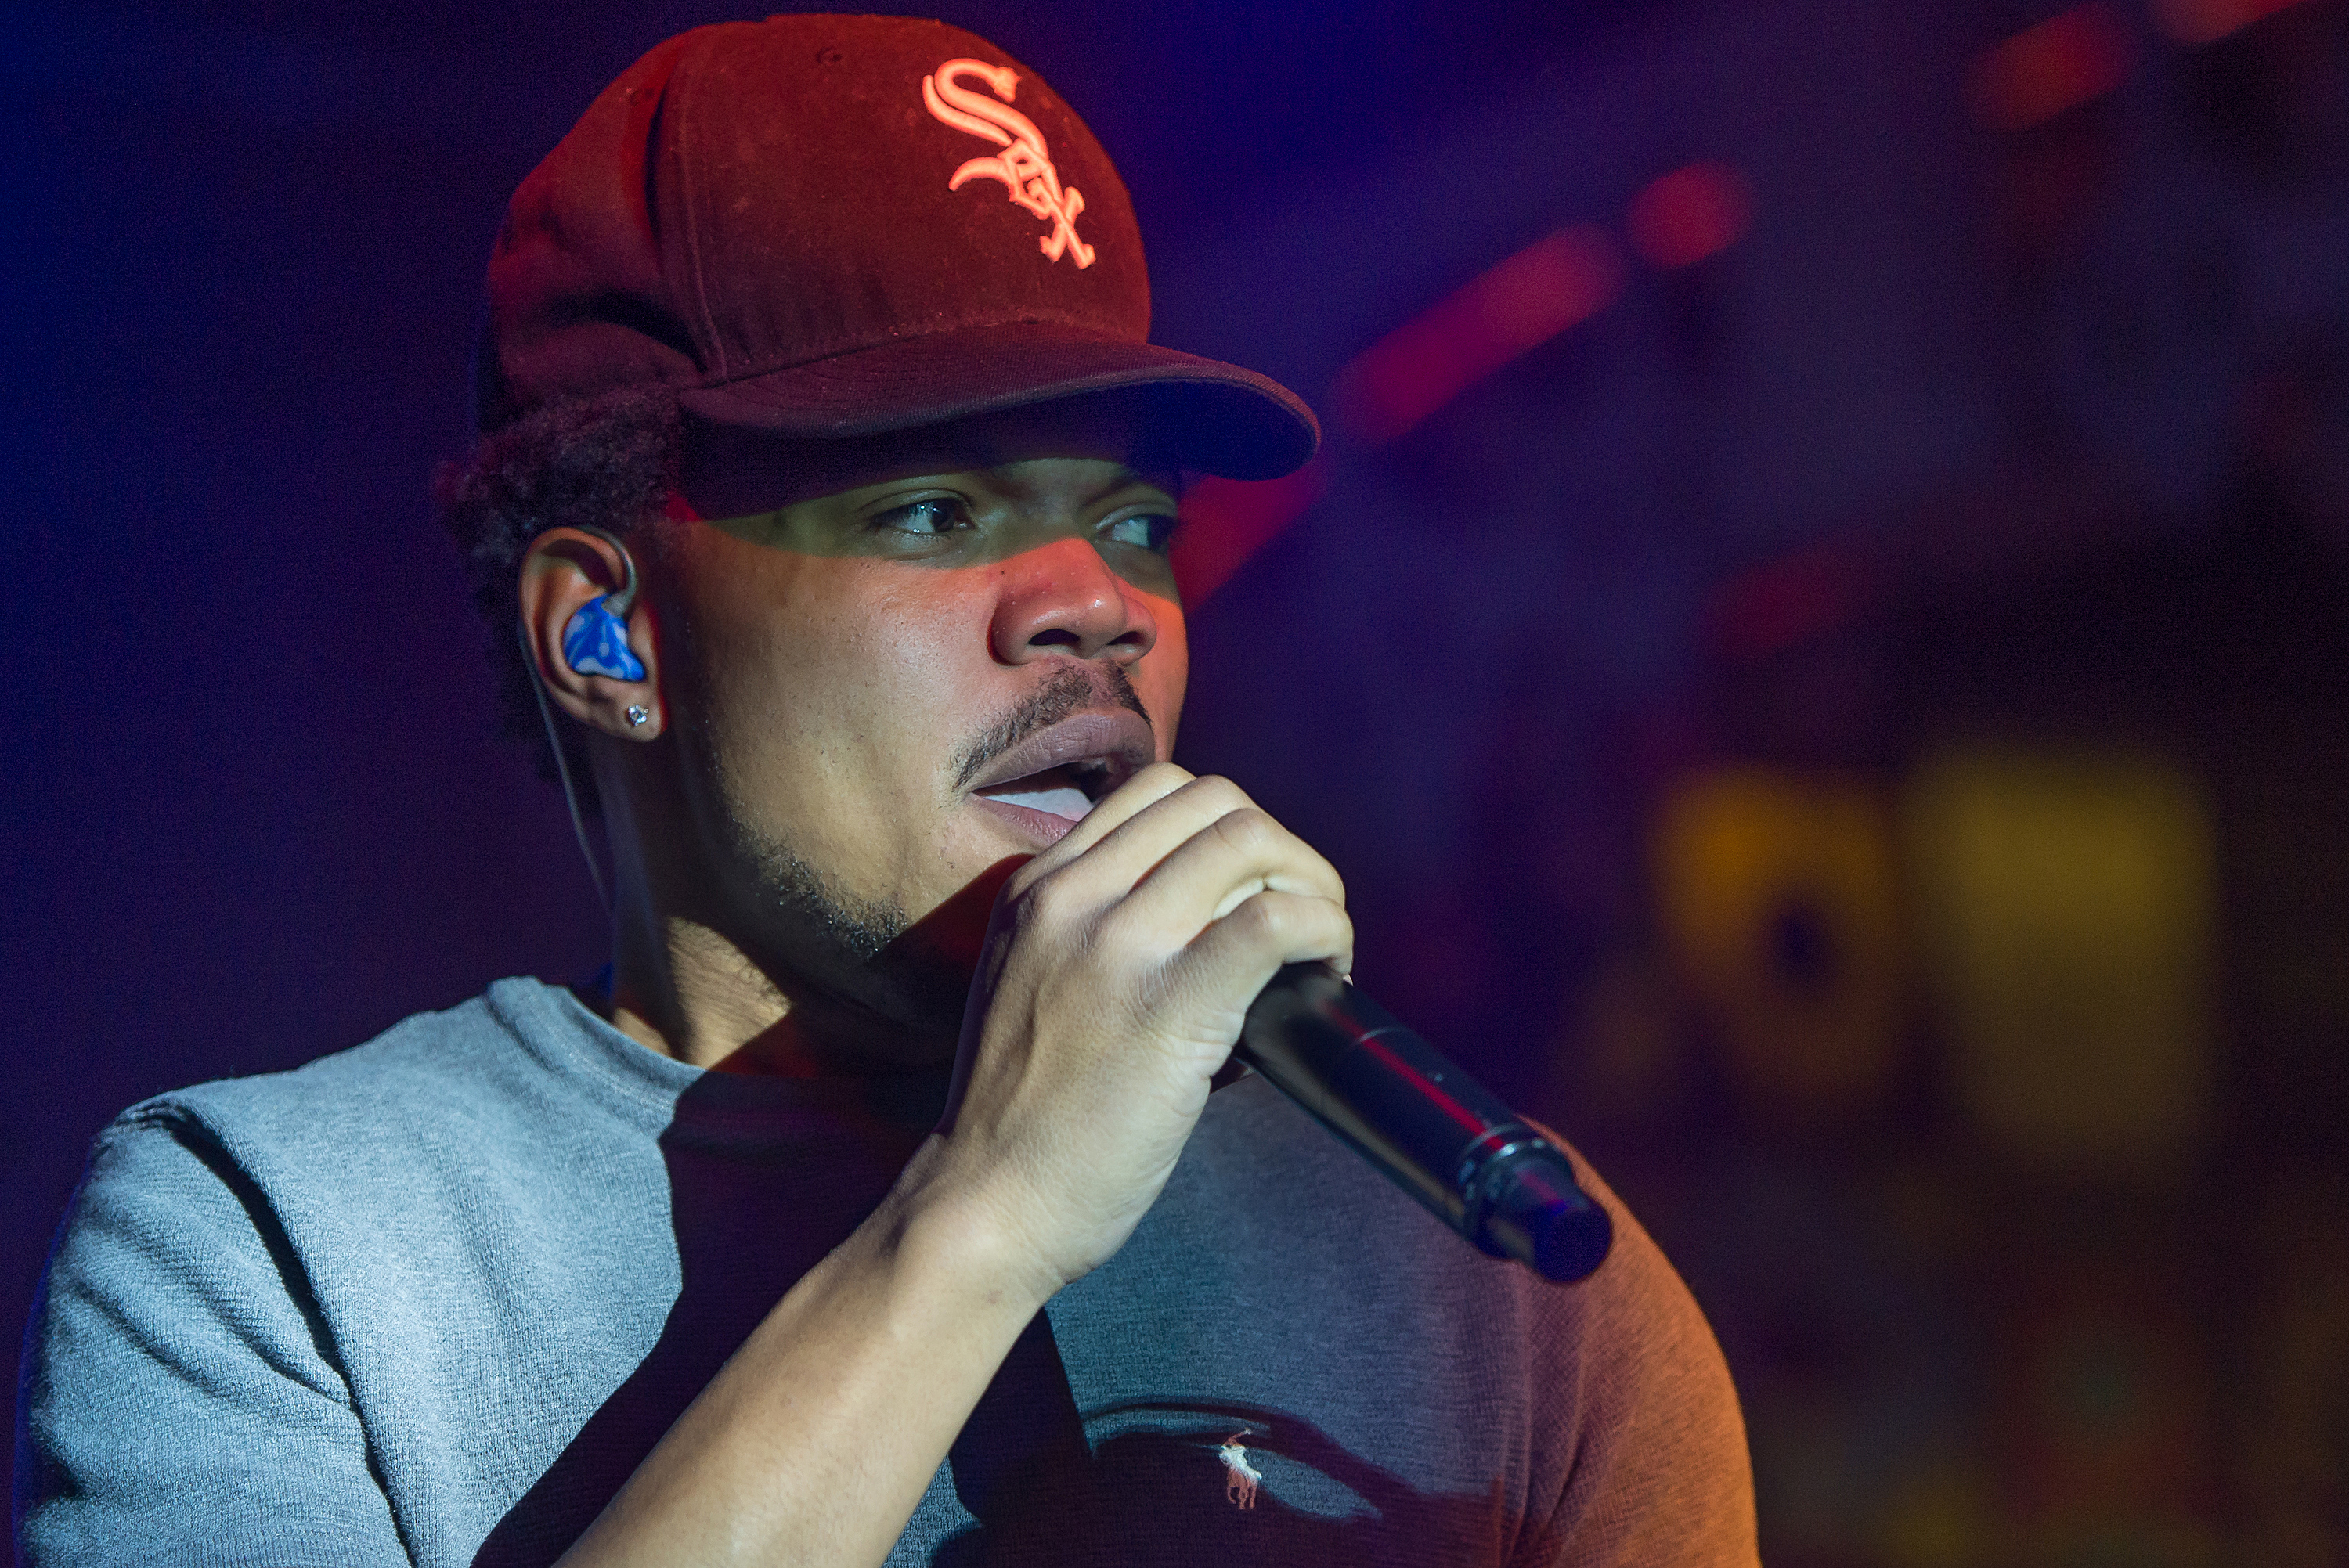 Hip-hop artist Chance The Rapper performs during the SoundCloud Go Launch at Flash Factory on March 31, 2016 in New York City. (Mike Pont—Getty Images)